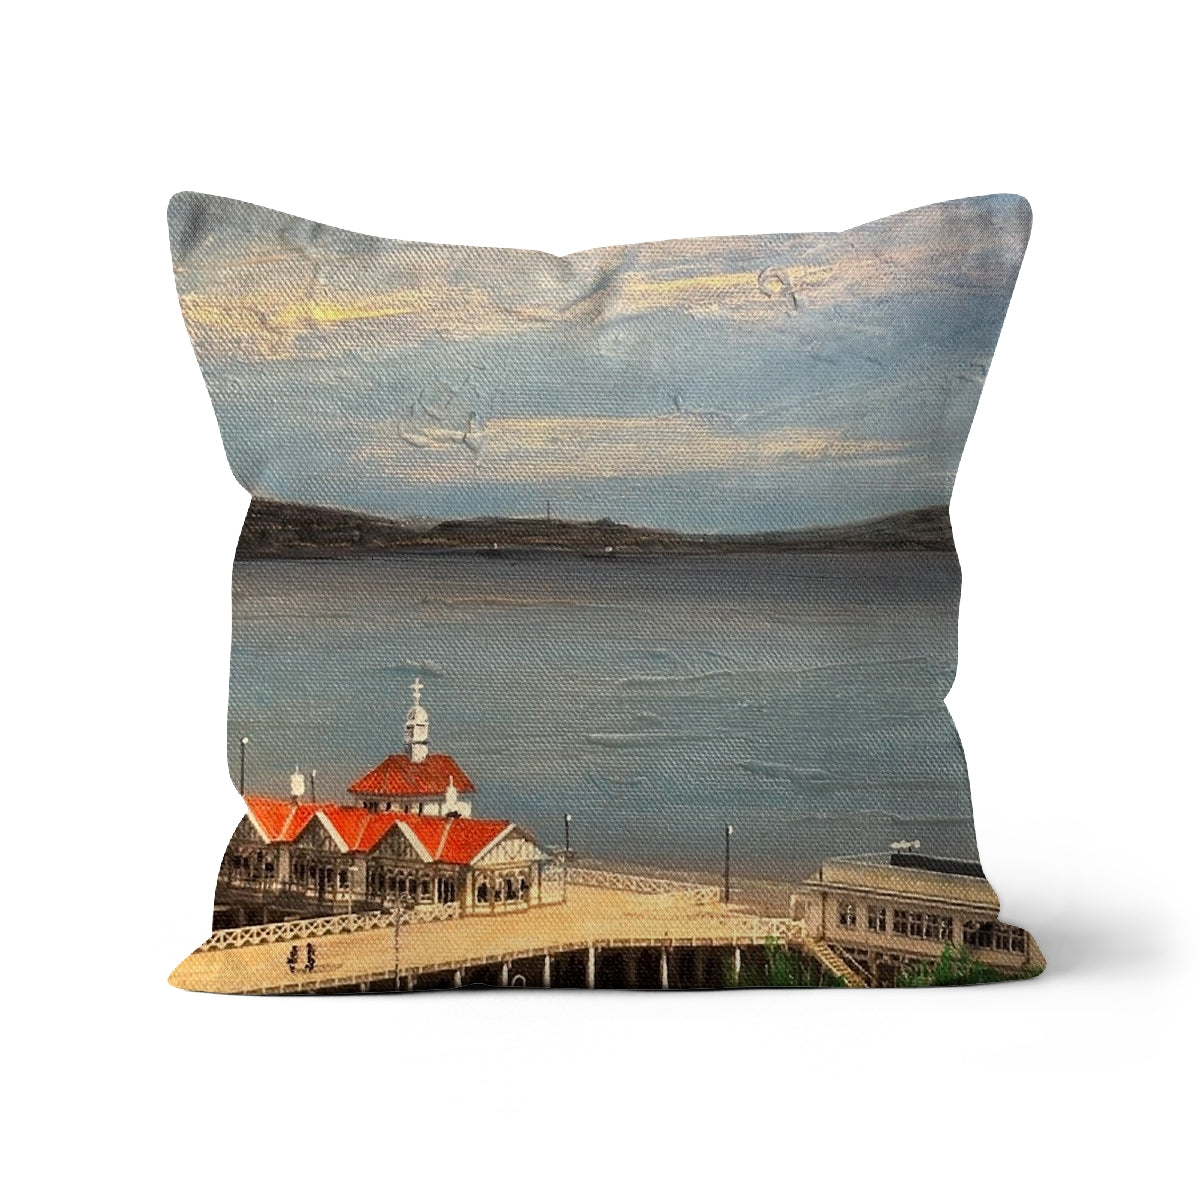 Looking From Dunoon Art Gifts Cushion-Cushions-River Clyde Art Gallery-Canvas-12"x12"-Paintings, Prints, Homeware, Art Gifts From Scotland By Scottish Artist Kevin Hunter